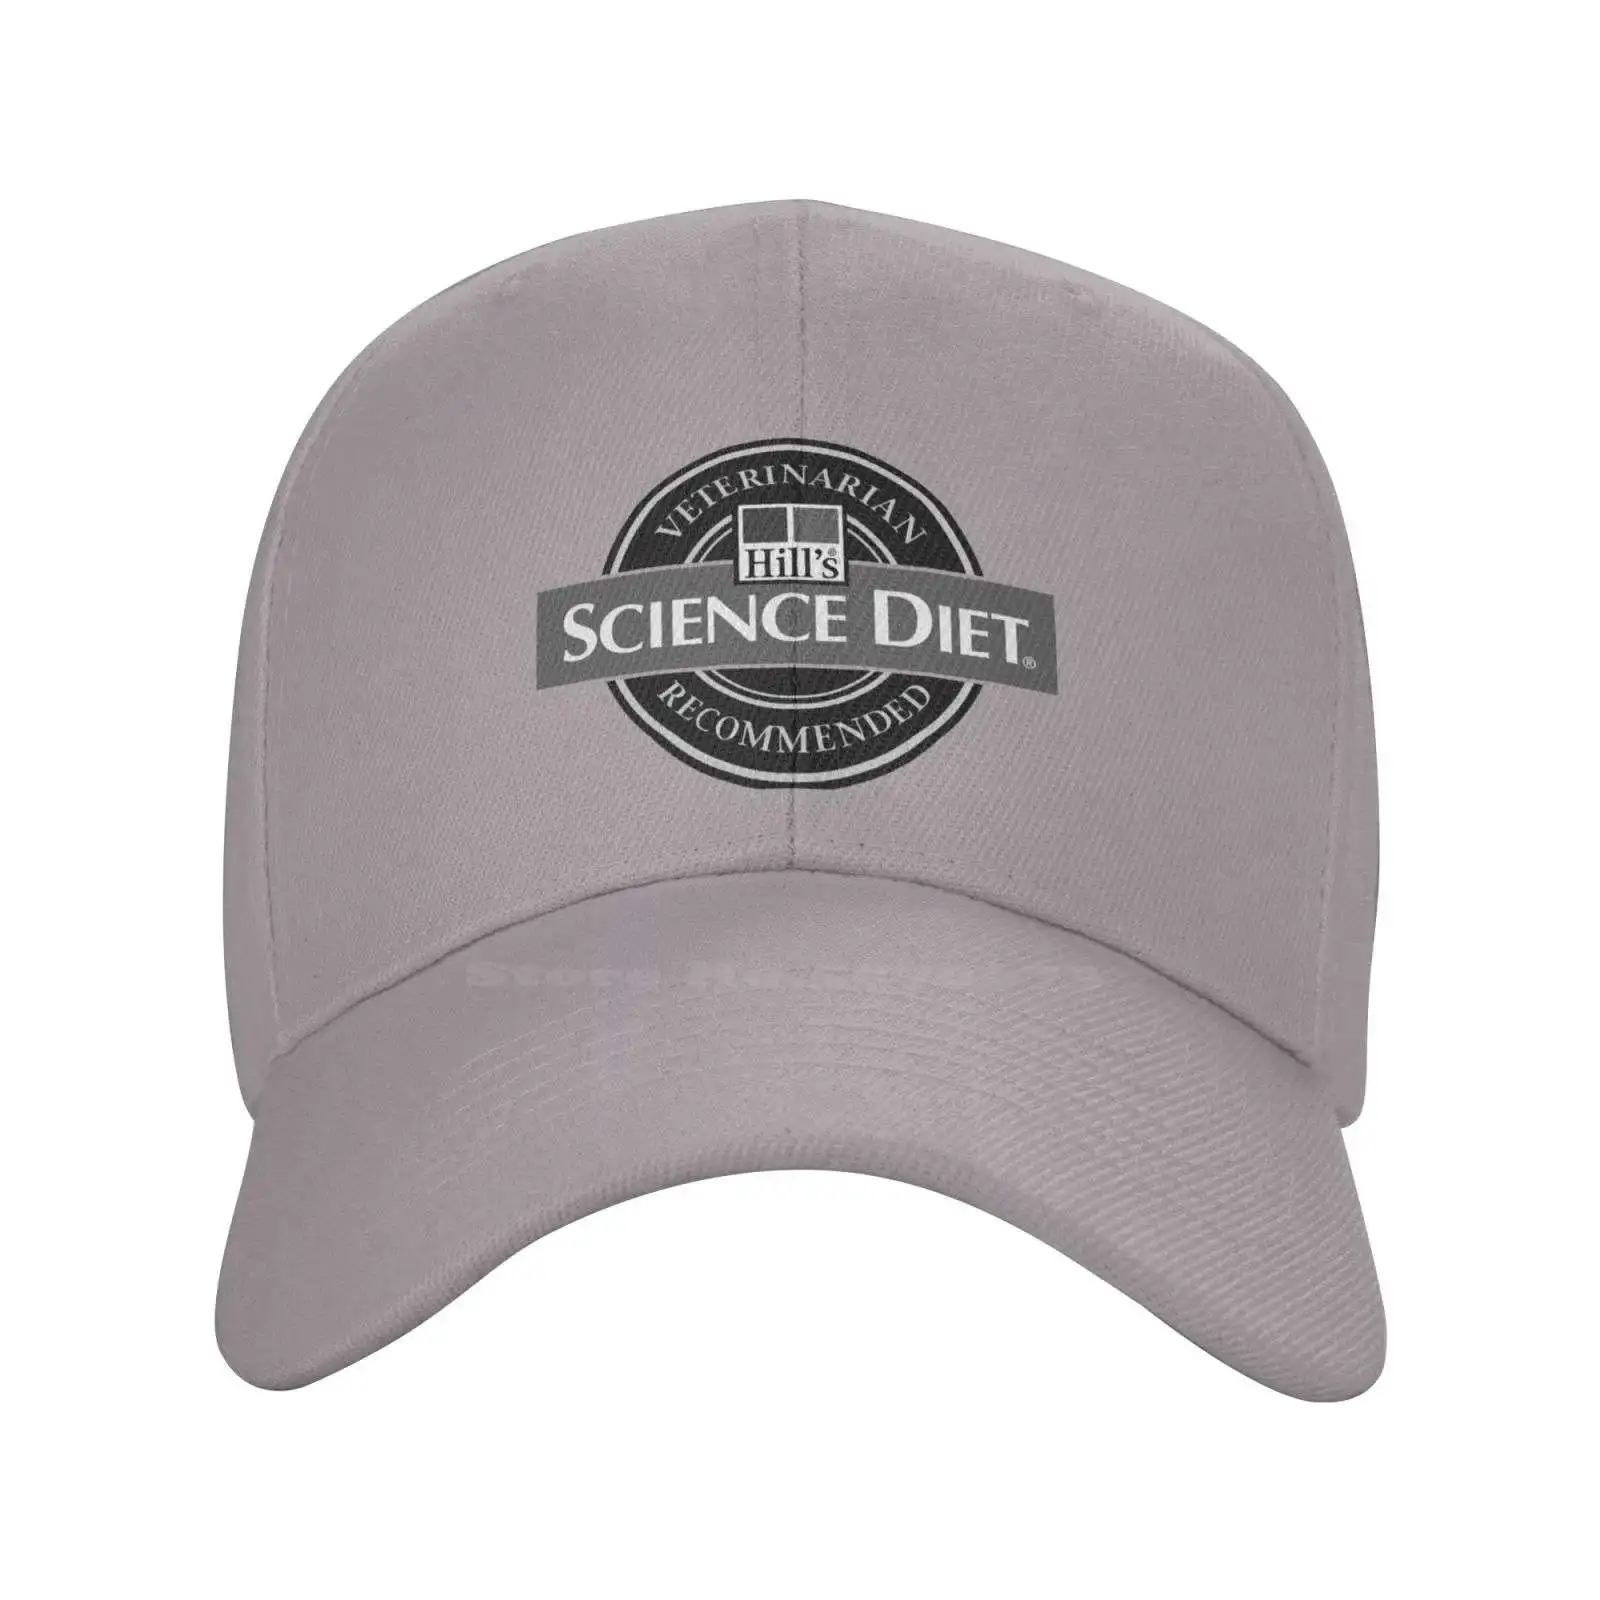 

Hill's Science Diet Logo Print Graphic Casual Denim cap Knitted hat Baseball cap